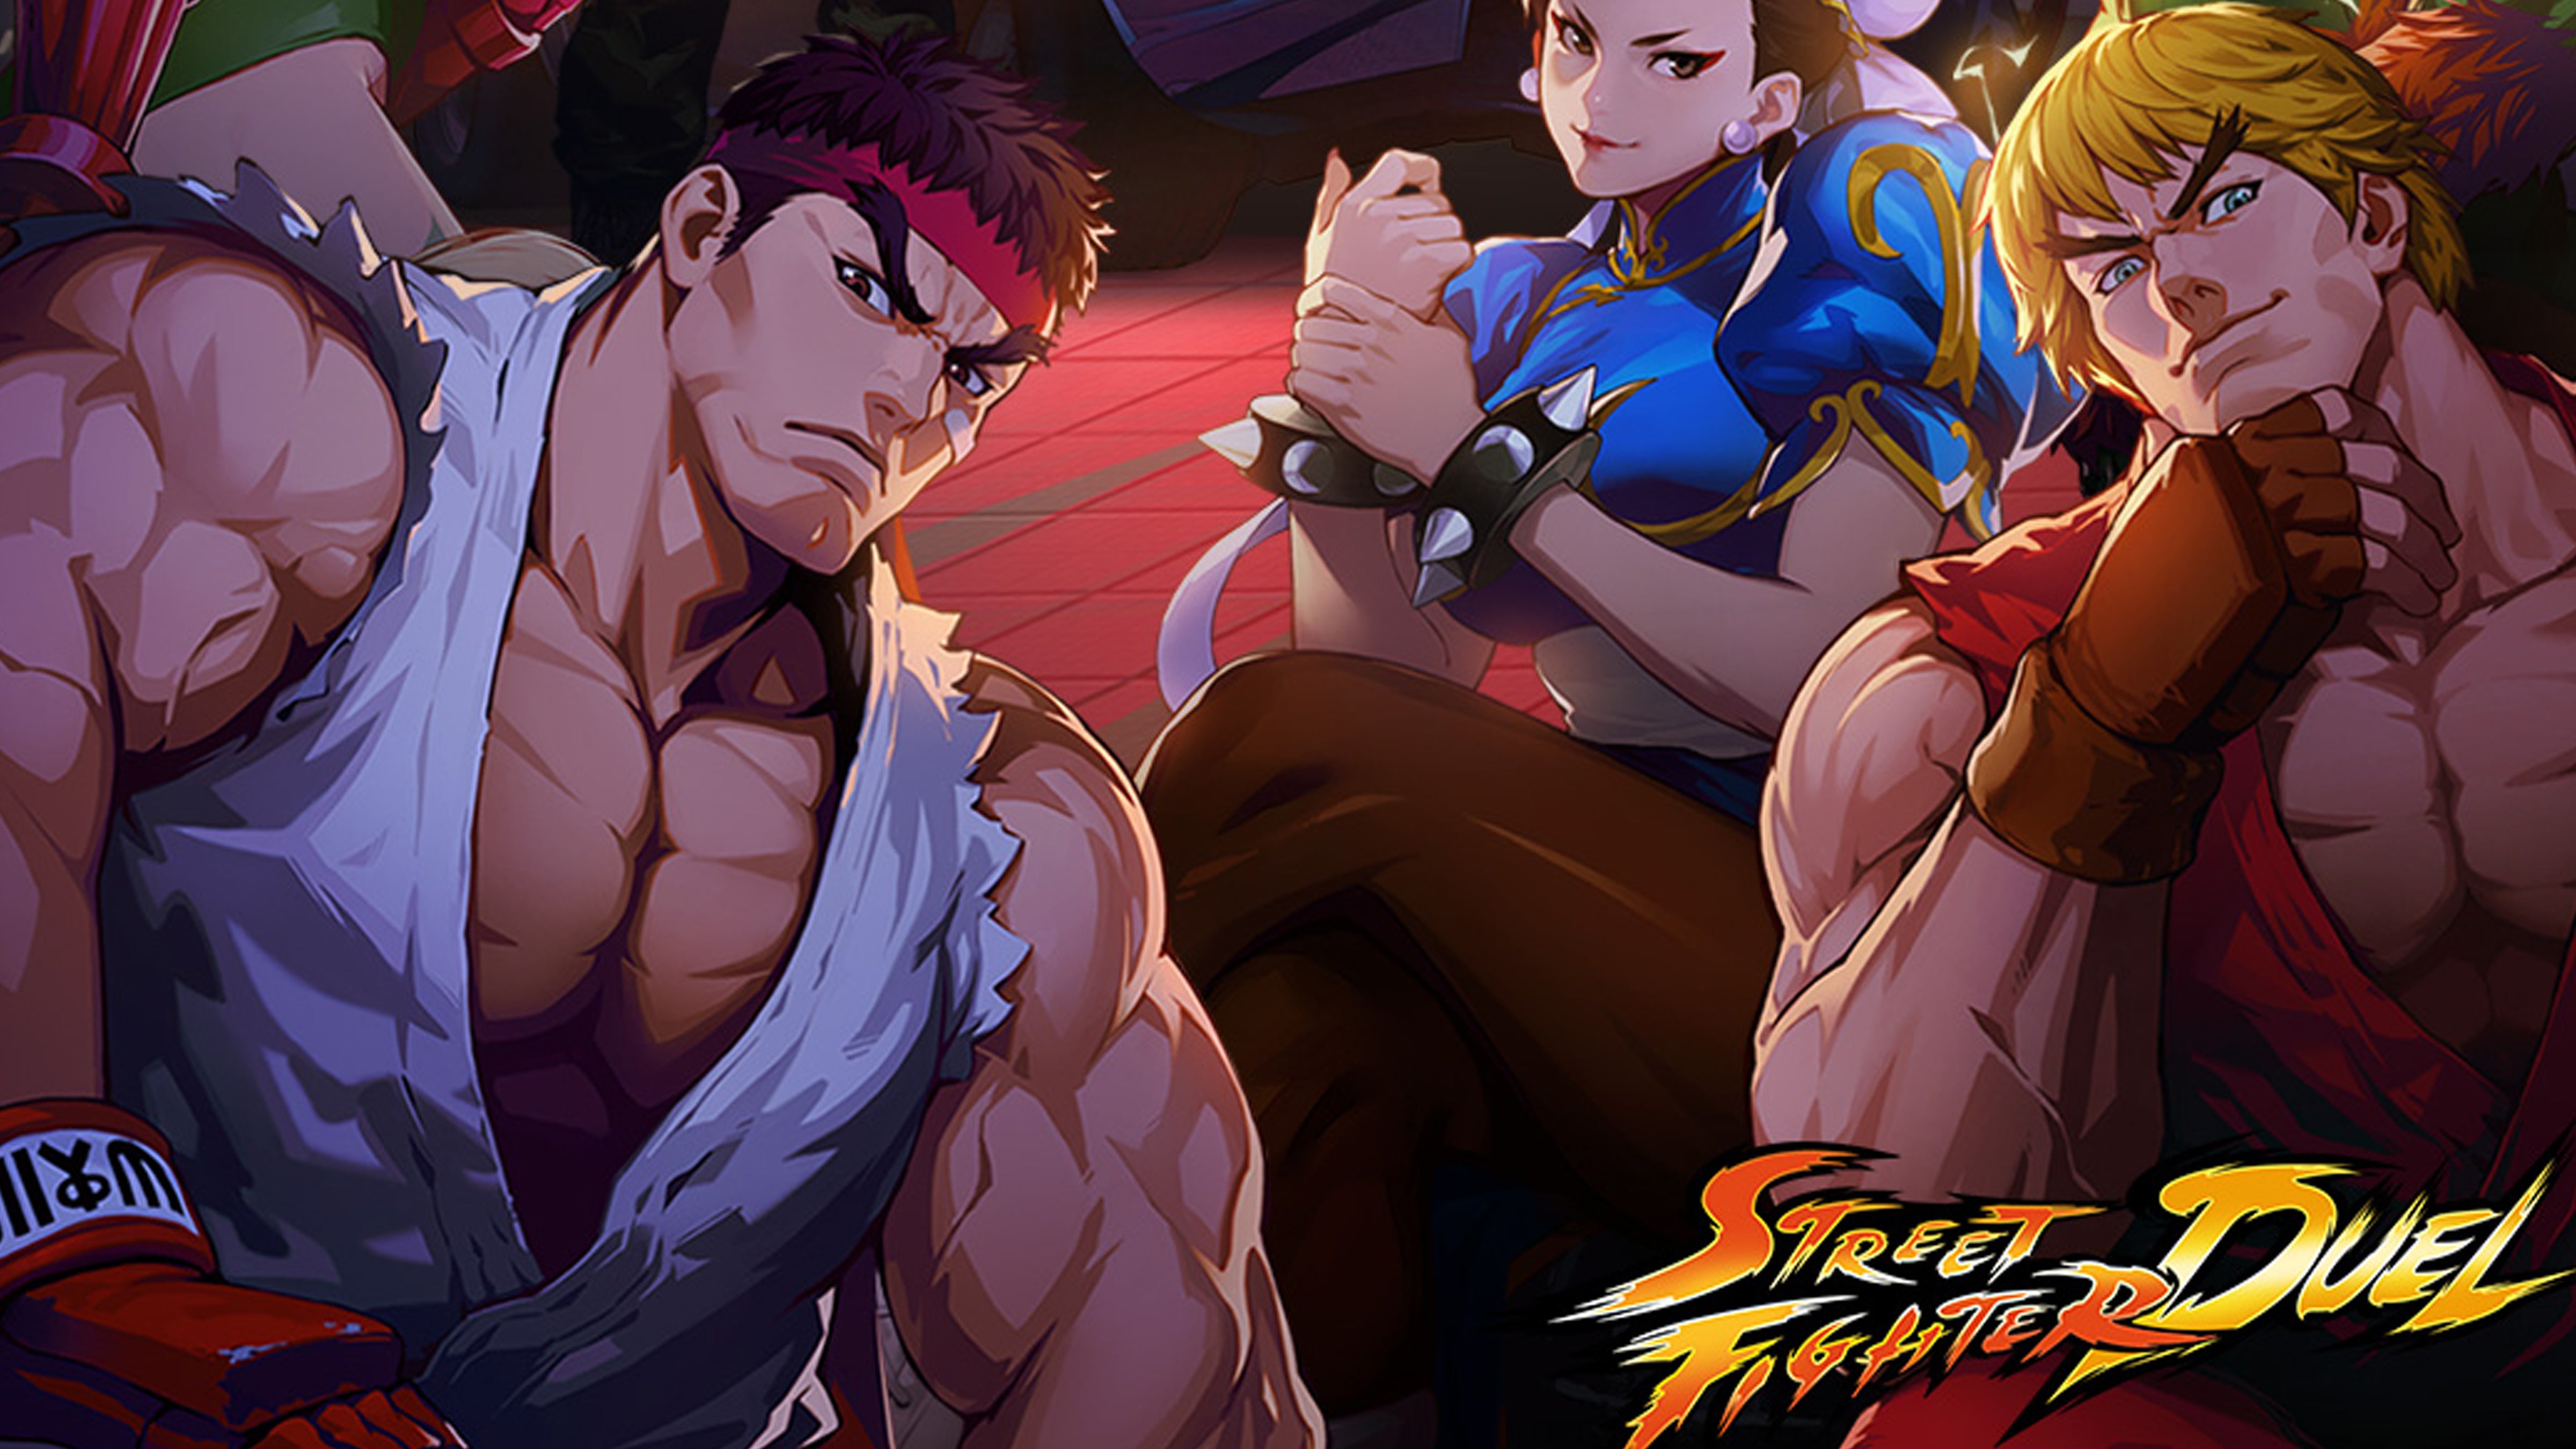 Artwork for Street Fighter Duel showing iconic characters Ken, Ryu and Chun-Li.